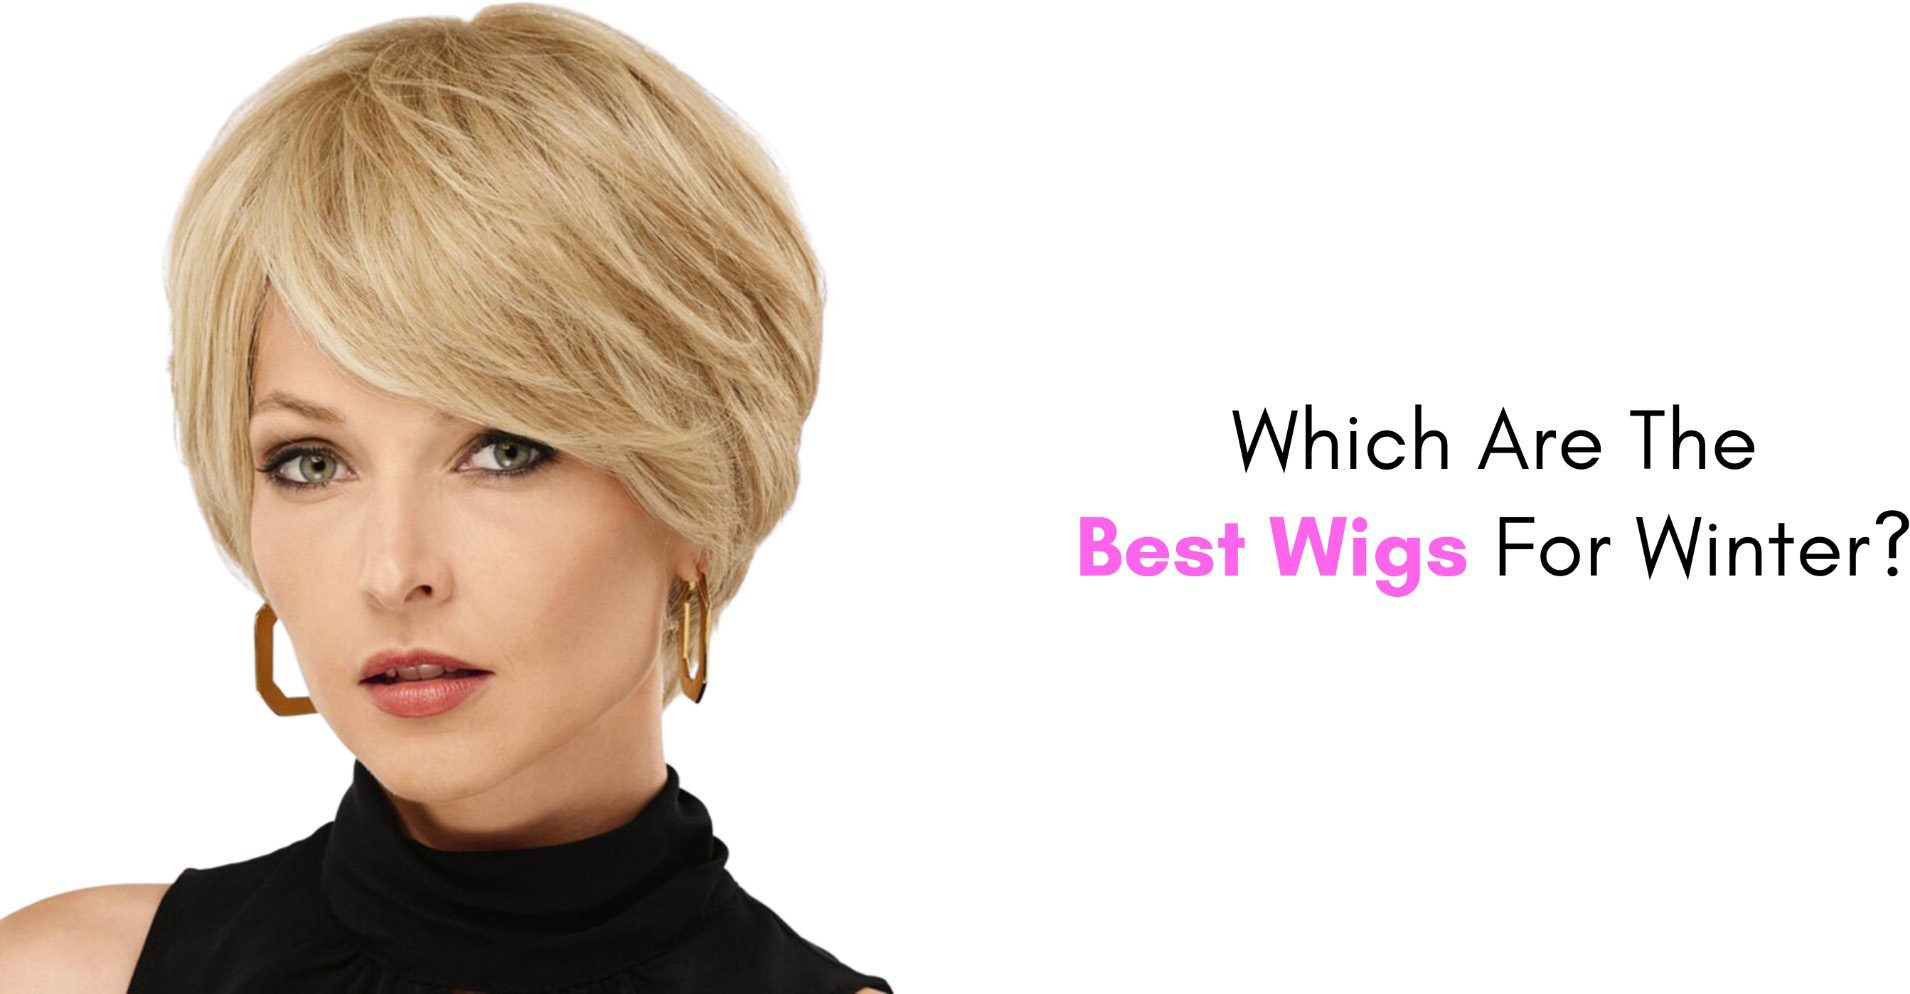 Which Are The Best Wigs For Winter?